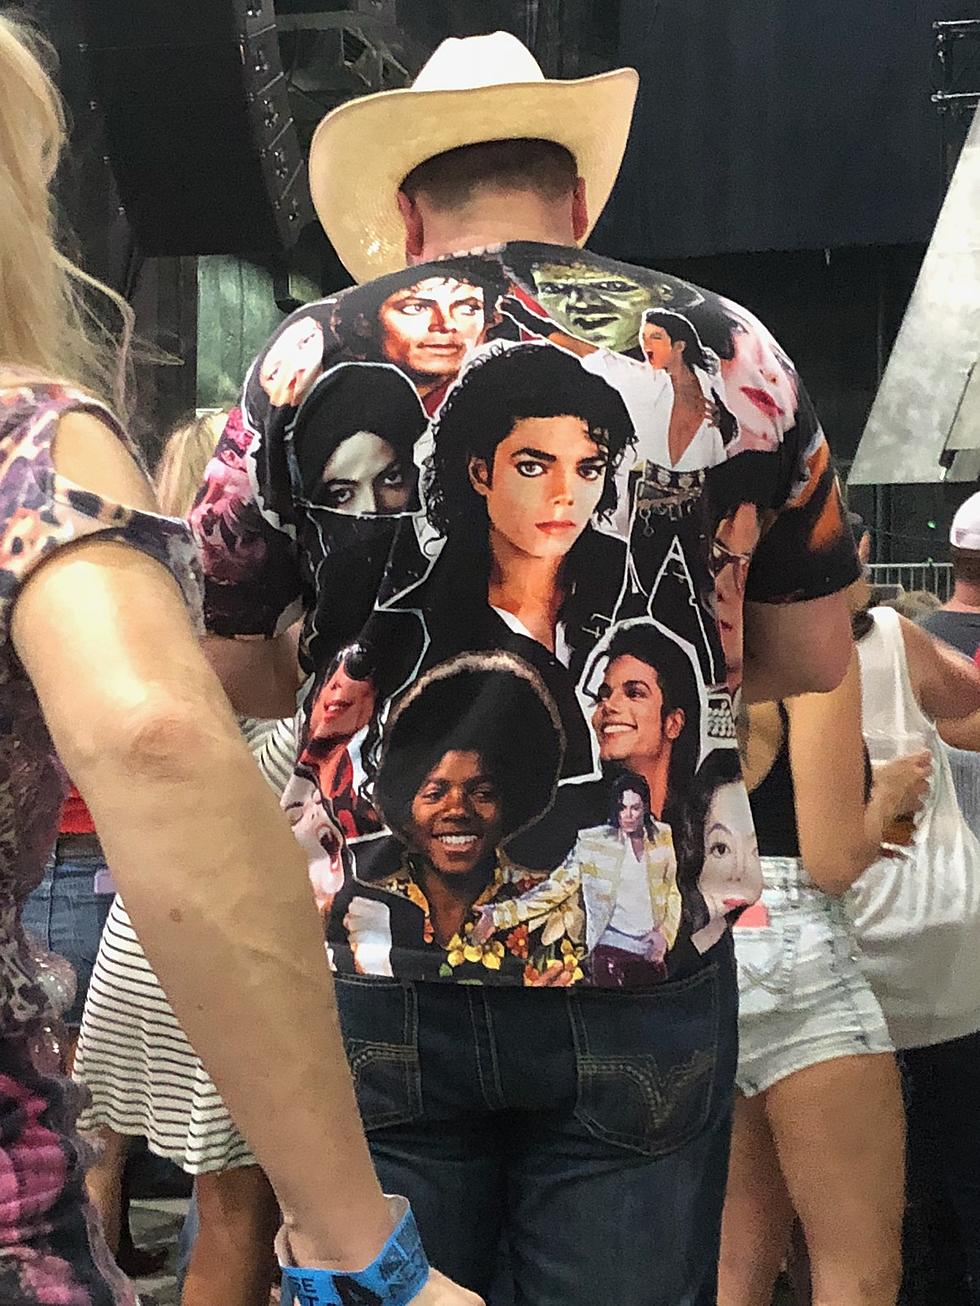 Coolest Shirt I’ve Seen In A While